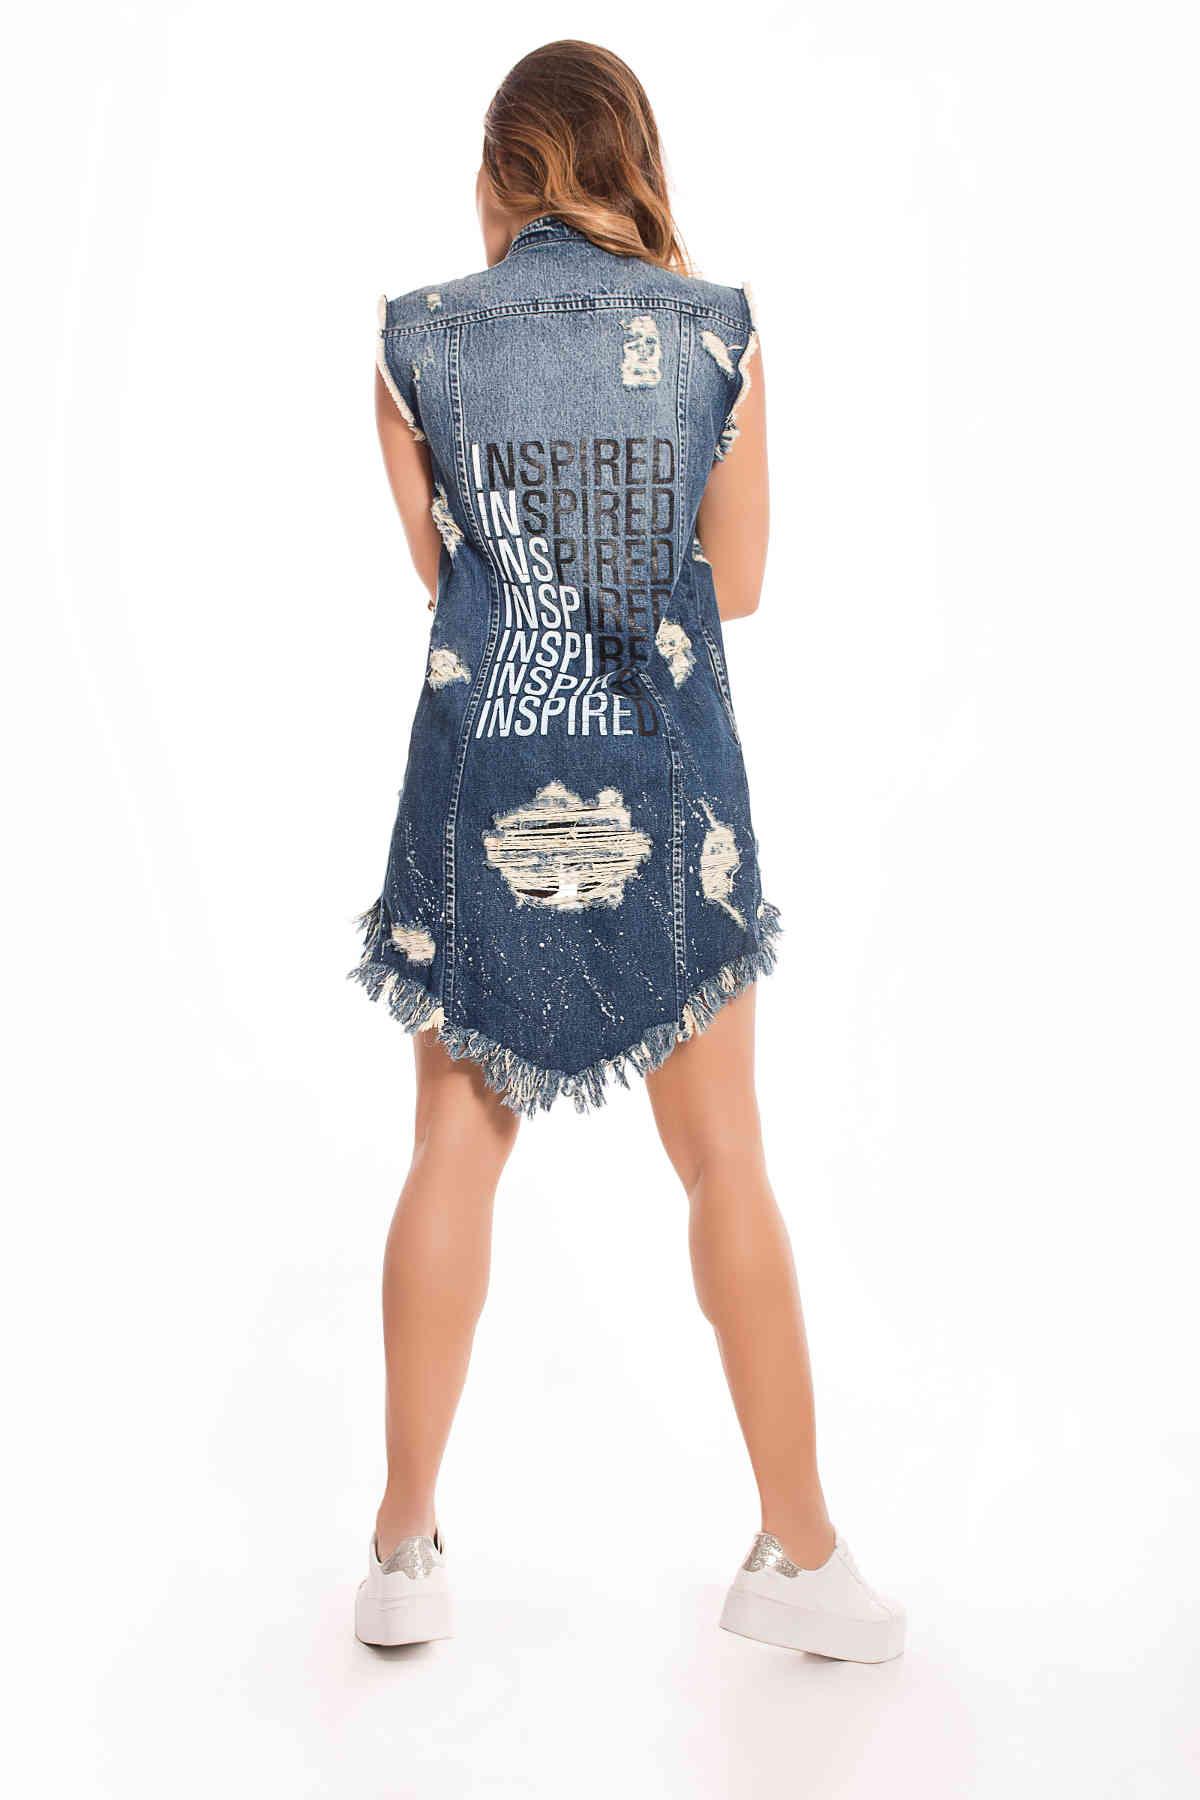 
Dressed in Jean. Indigo Tone Medium, front buttons, sleeveless. Destroyer, asymmetrical and painter effect, stamped with motif written on the back.